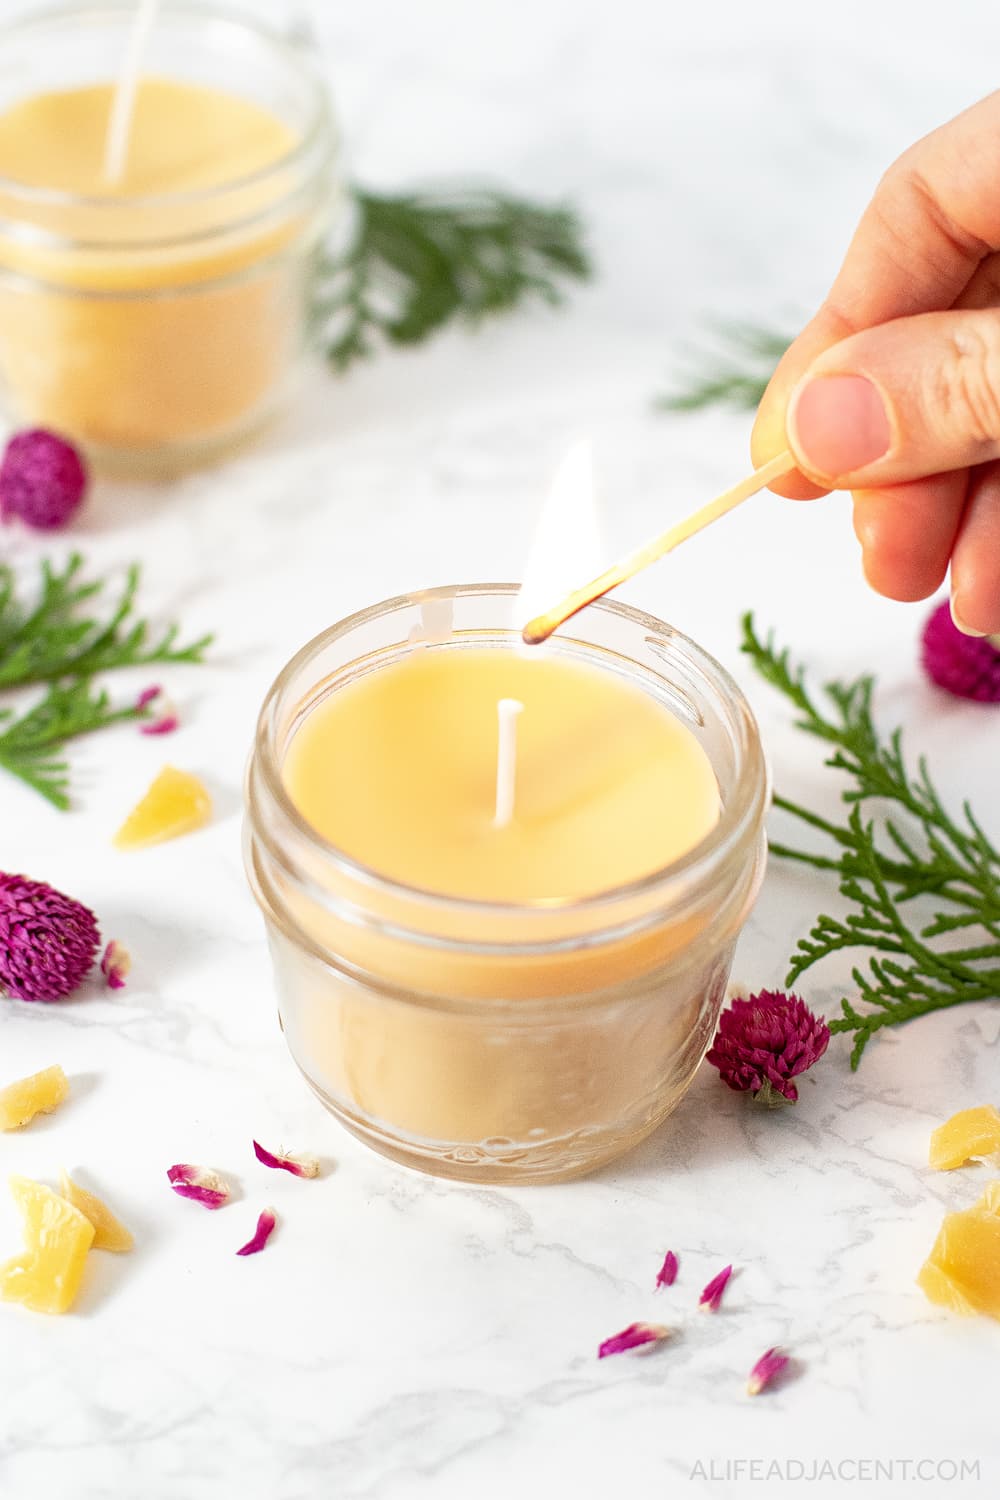 Hue Premium Fragrance Oil Scented Body Oil DIY Candle 